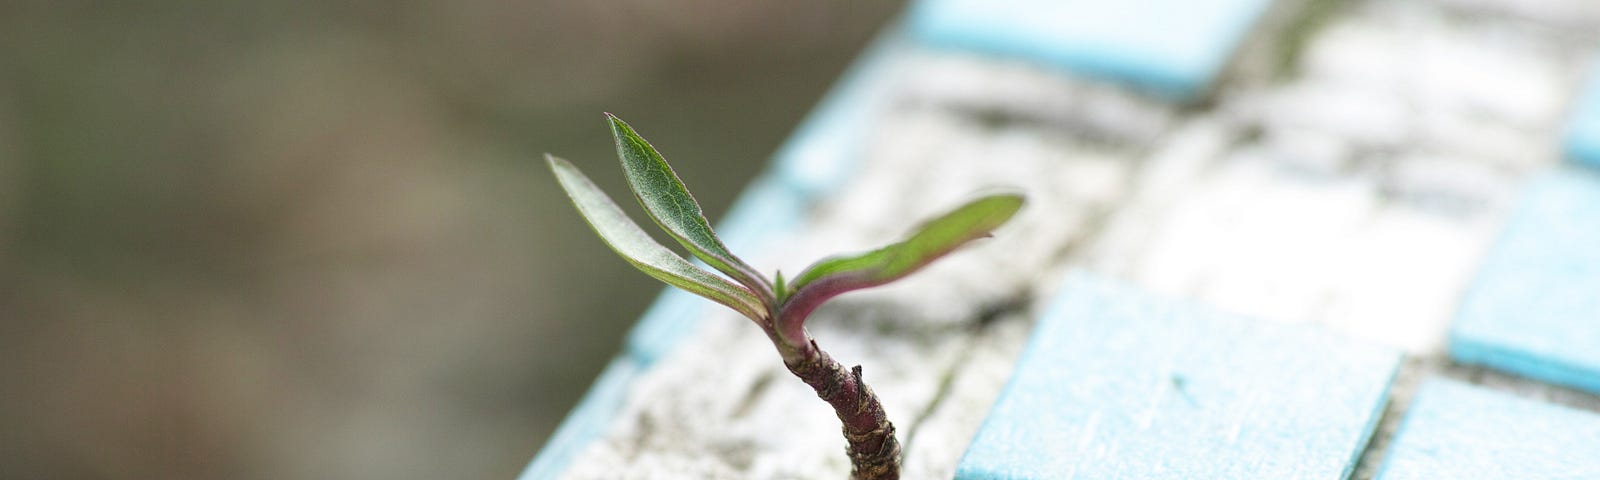 Small plant growing out of a crack in a wall